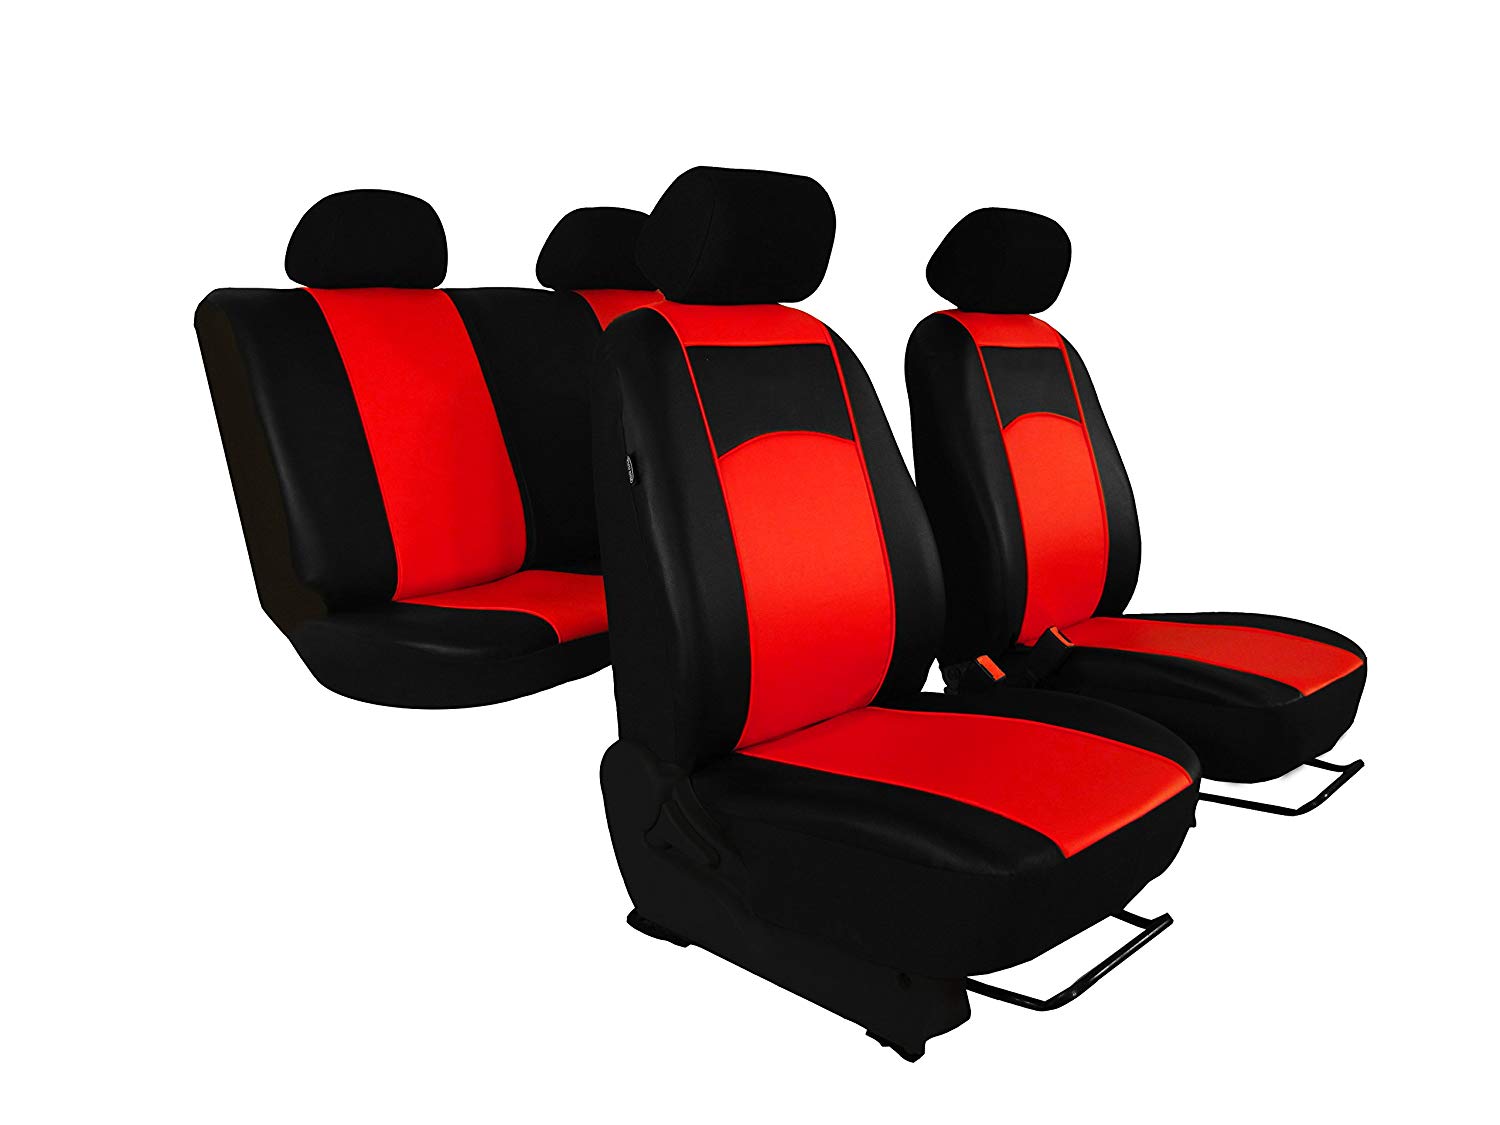 Customised Caddy 5 Seats. Design Faux Leather Bright Red.. Car Seat Cover Set